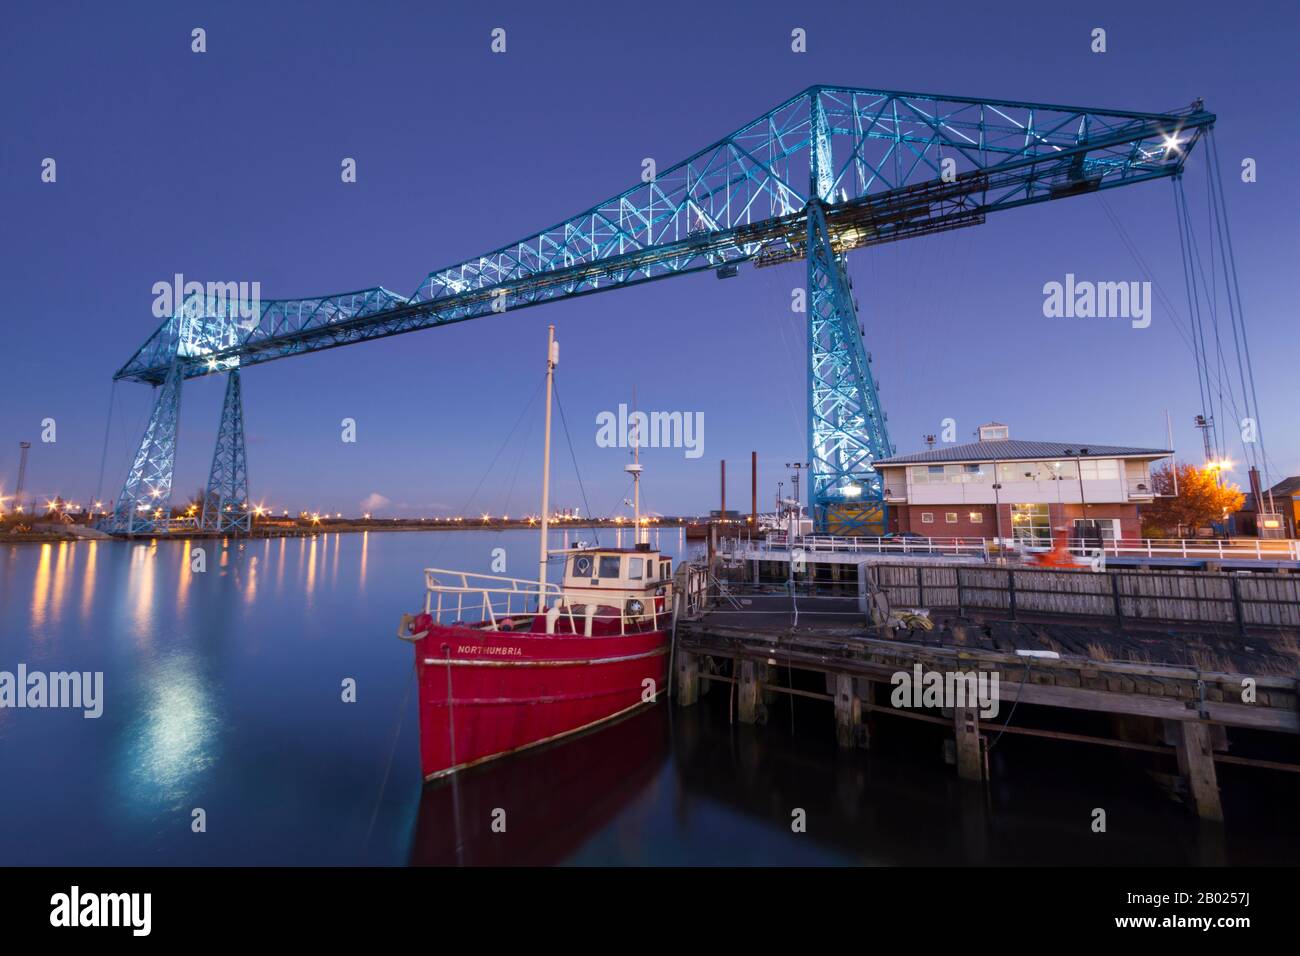 The Transporter Bridge, an Edwardian engineering project across the River Tees, Middlesbrough, England Stock Photo